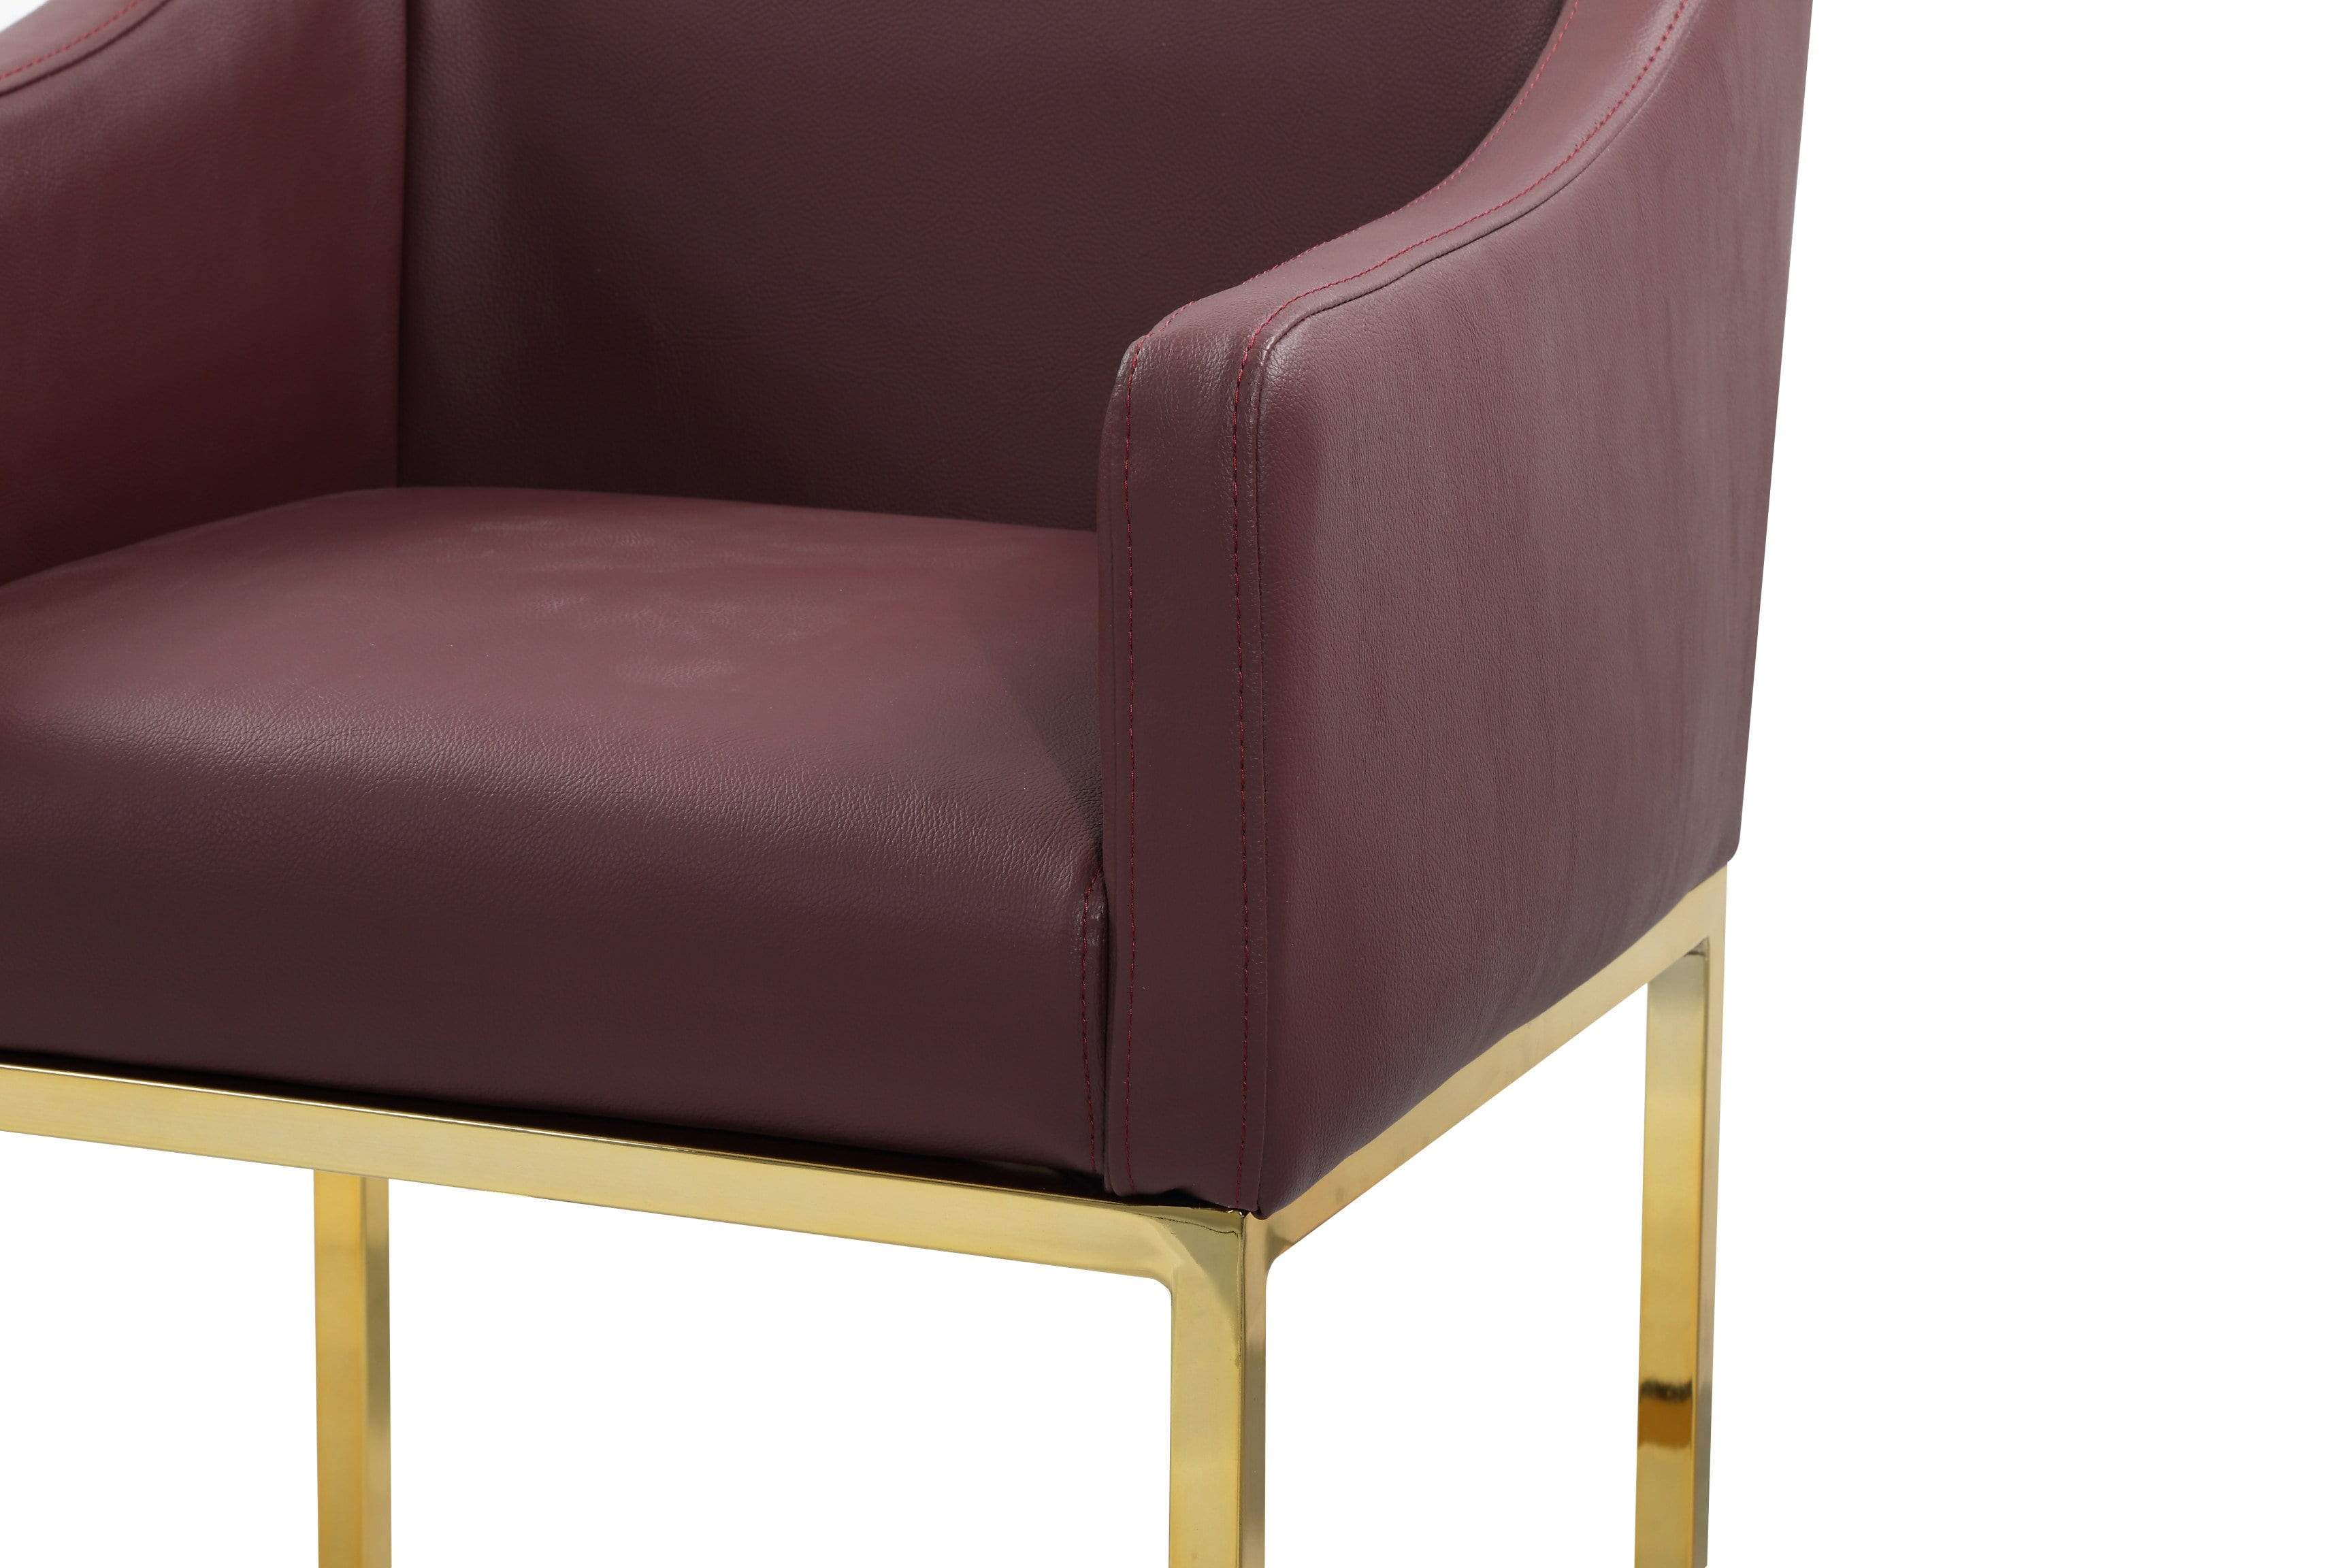 Cordele Faux Leather Bar Stool Chair Gold Base